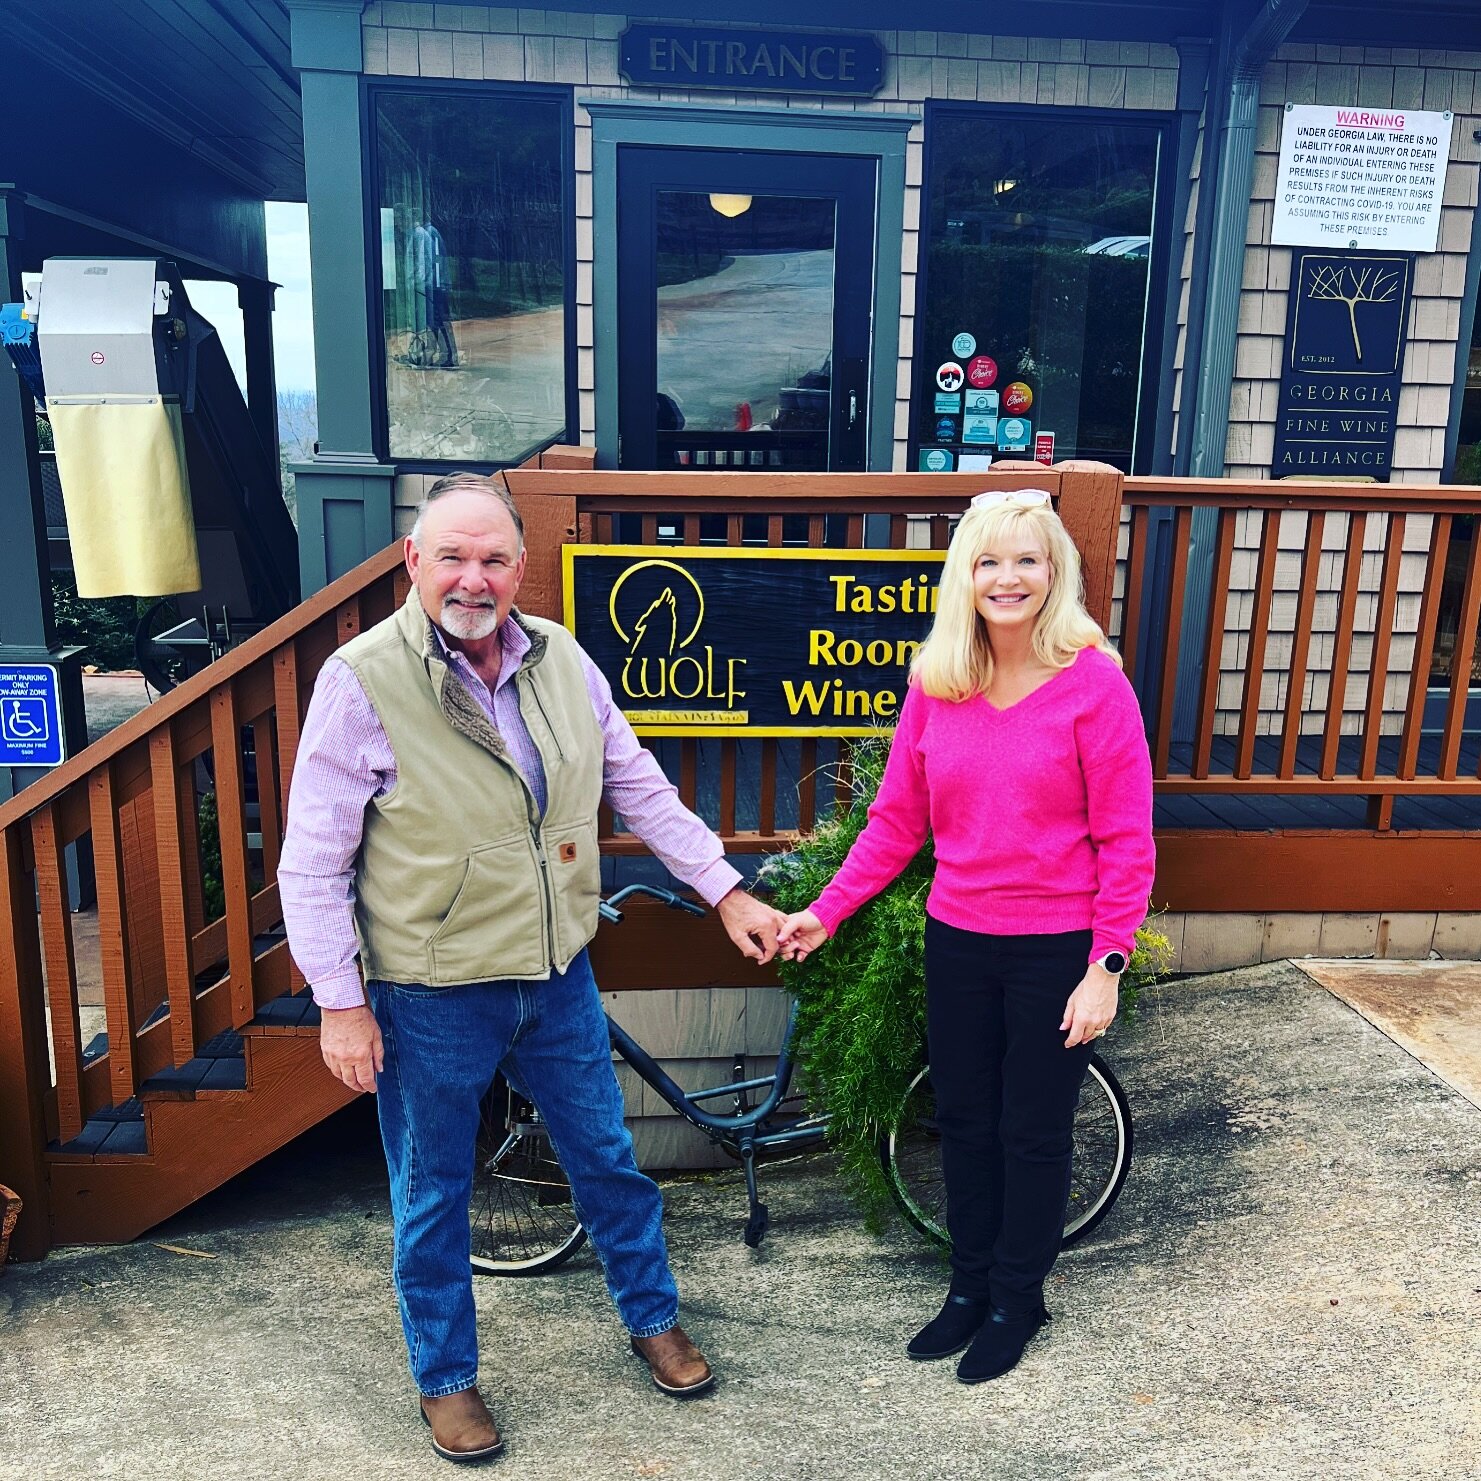 One of our couples wine tours for valentines day! Pick-up / drop off in Cleveland. Itinerary: @wolfmountainvineyards @kayavineyards @cottagevineyard 

#northgawinerours #northgeorgia #discoverdahlonega #experiencenorthga